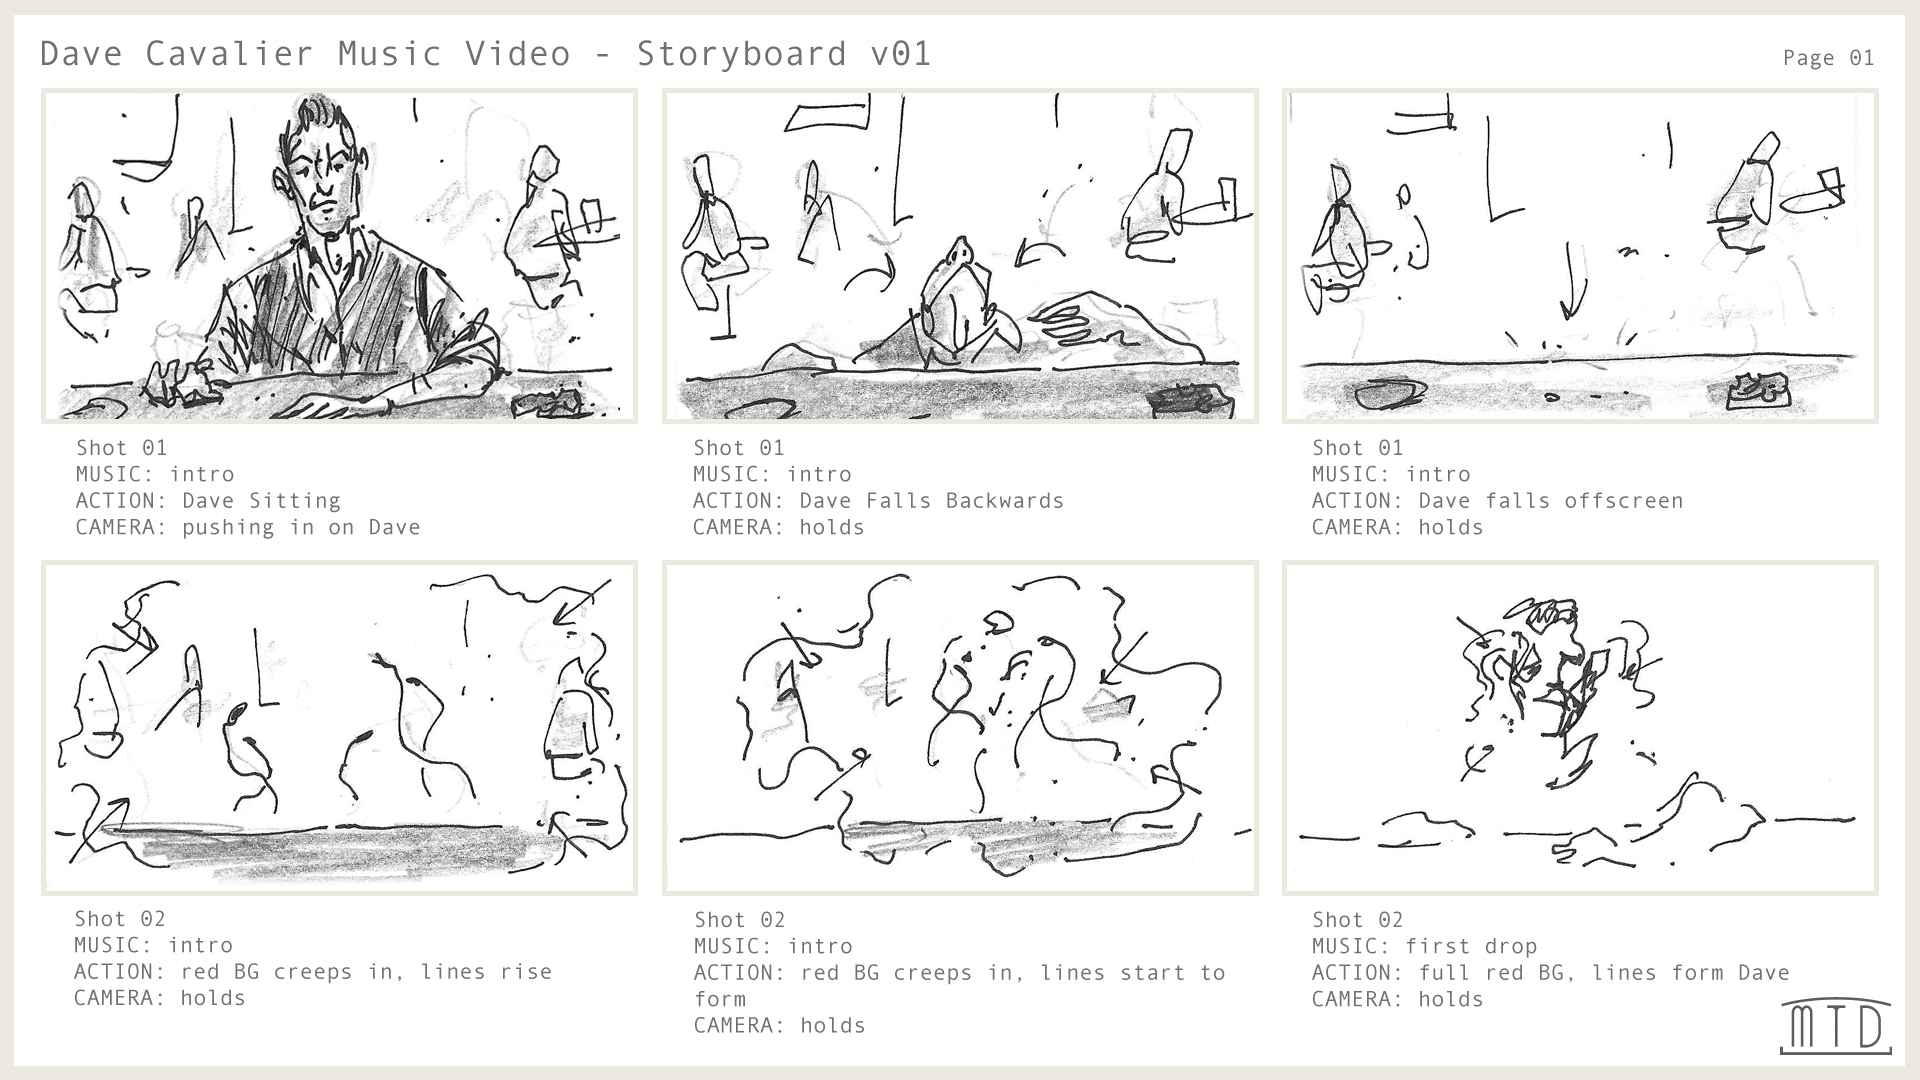 The Hold storyboard page 1